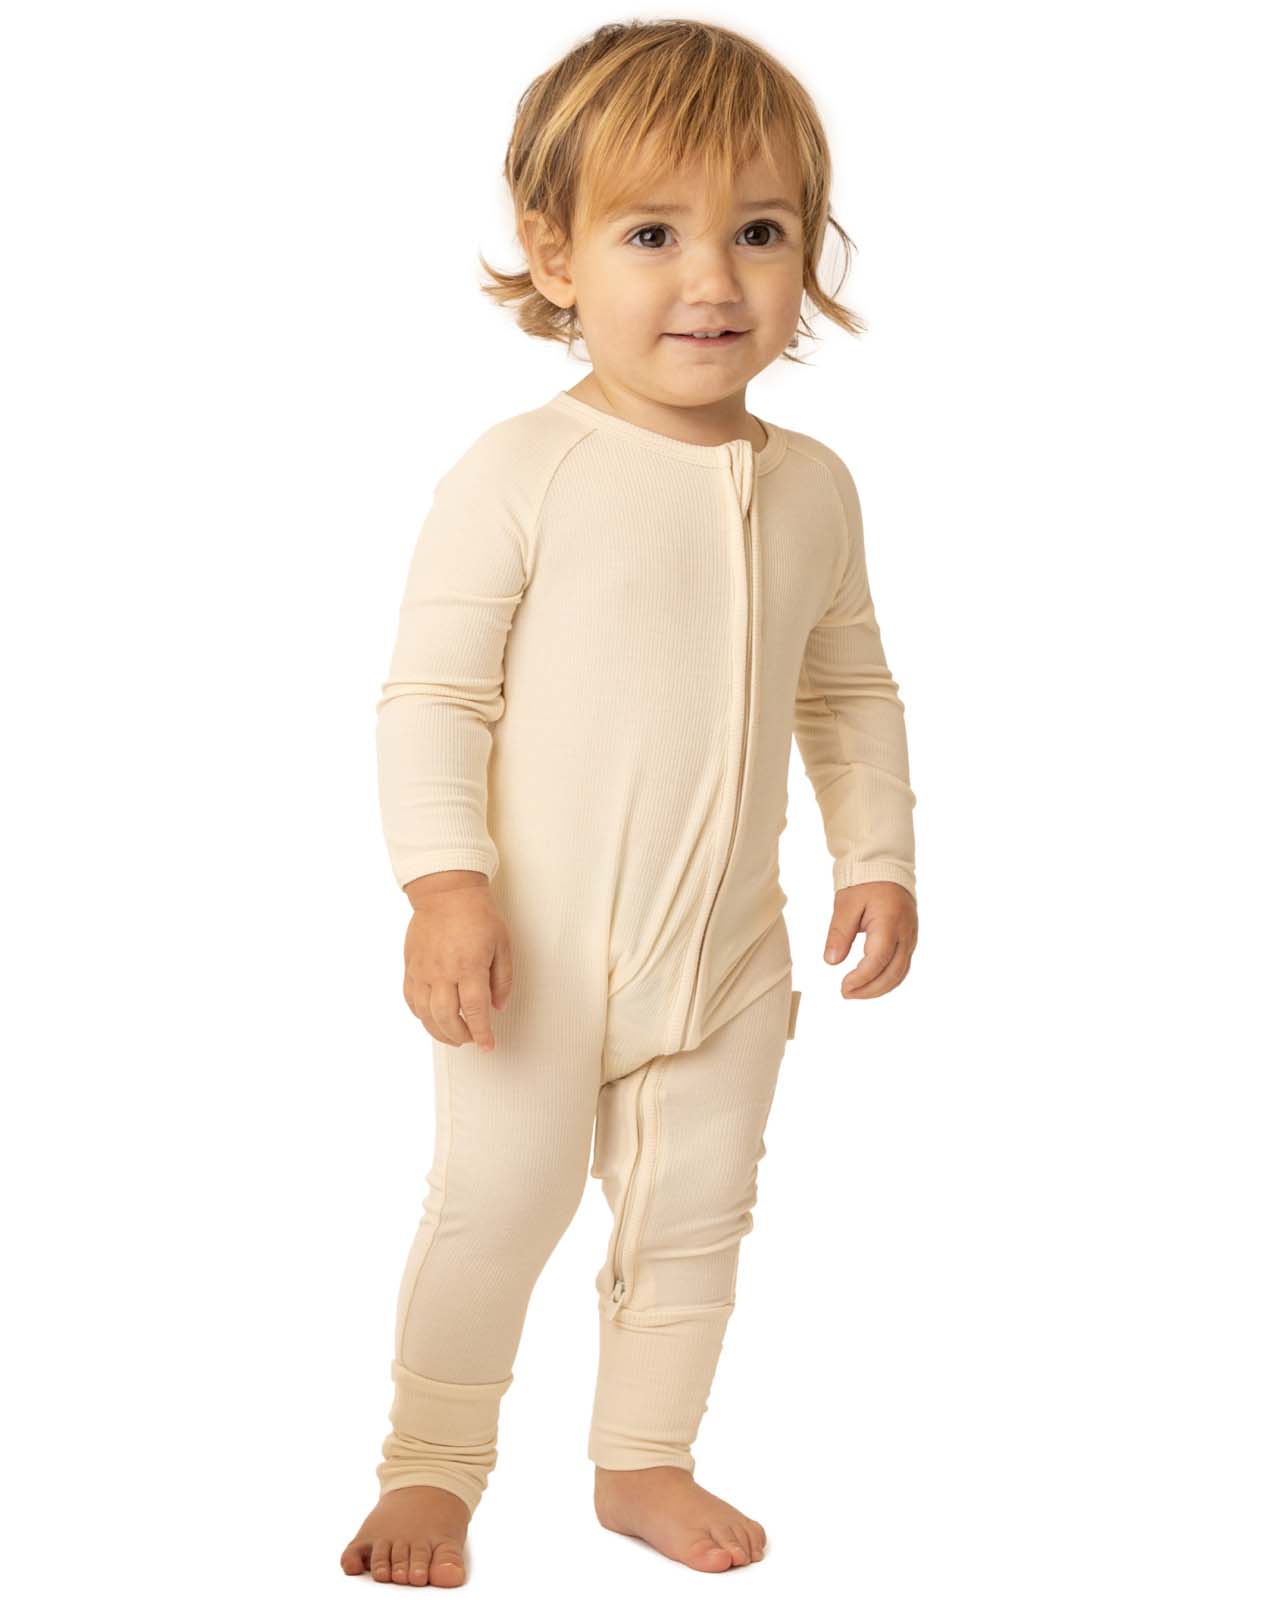 baby wearing ivory baby grow